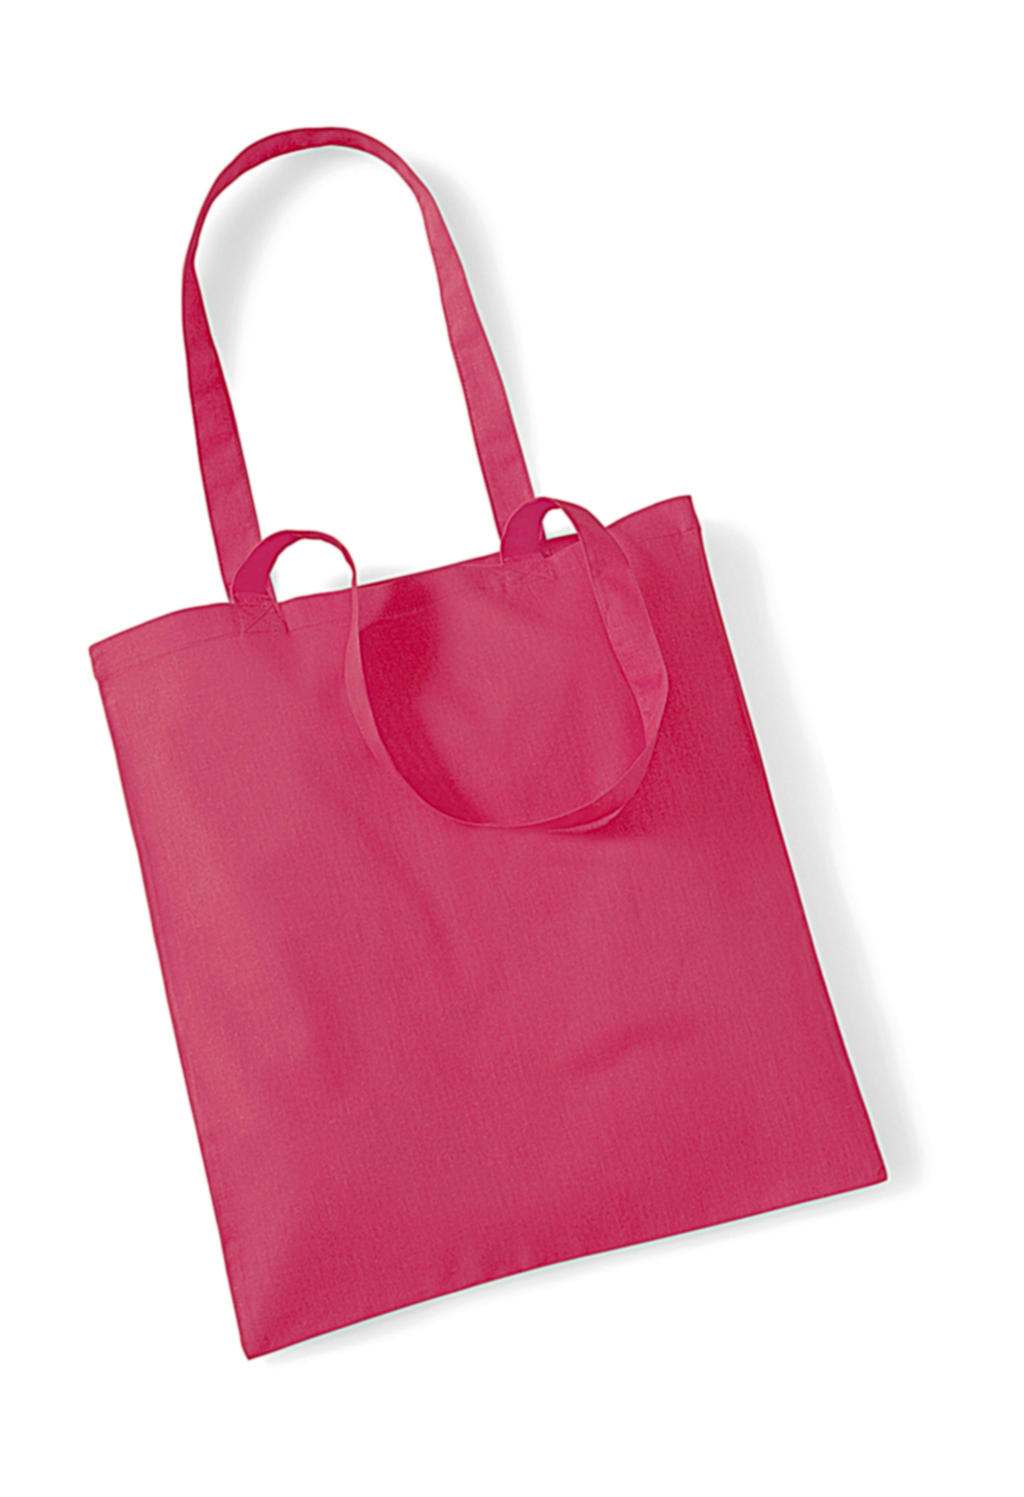  Bag for Life - Long Handles in Farbe Raspberry Pink